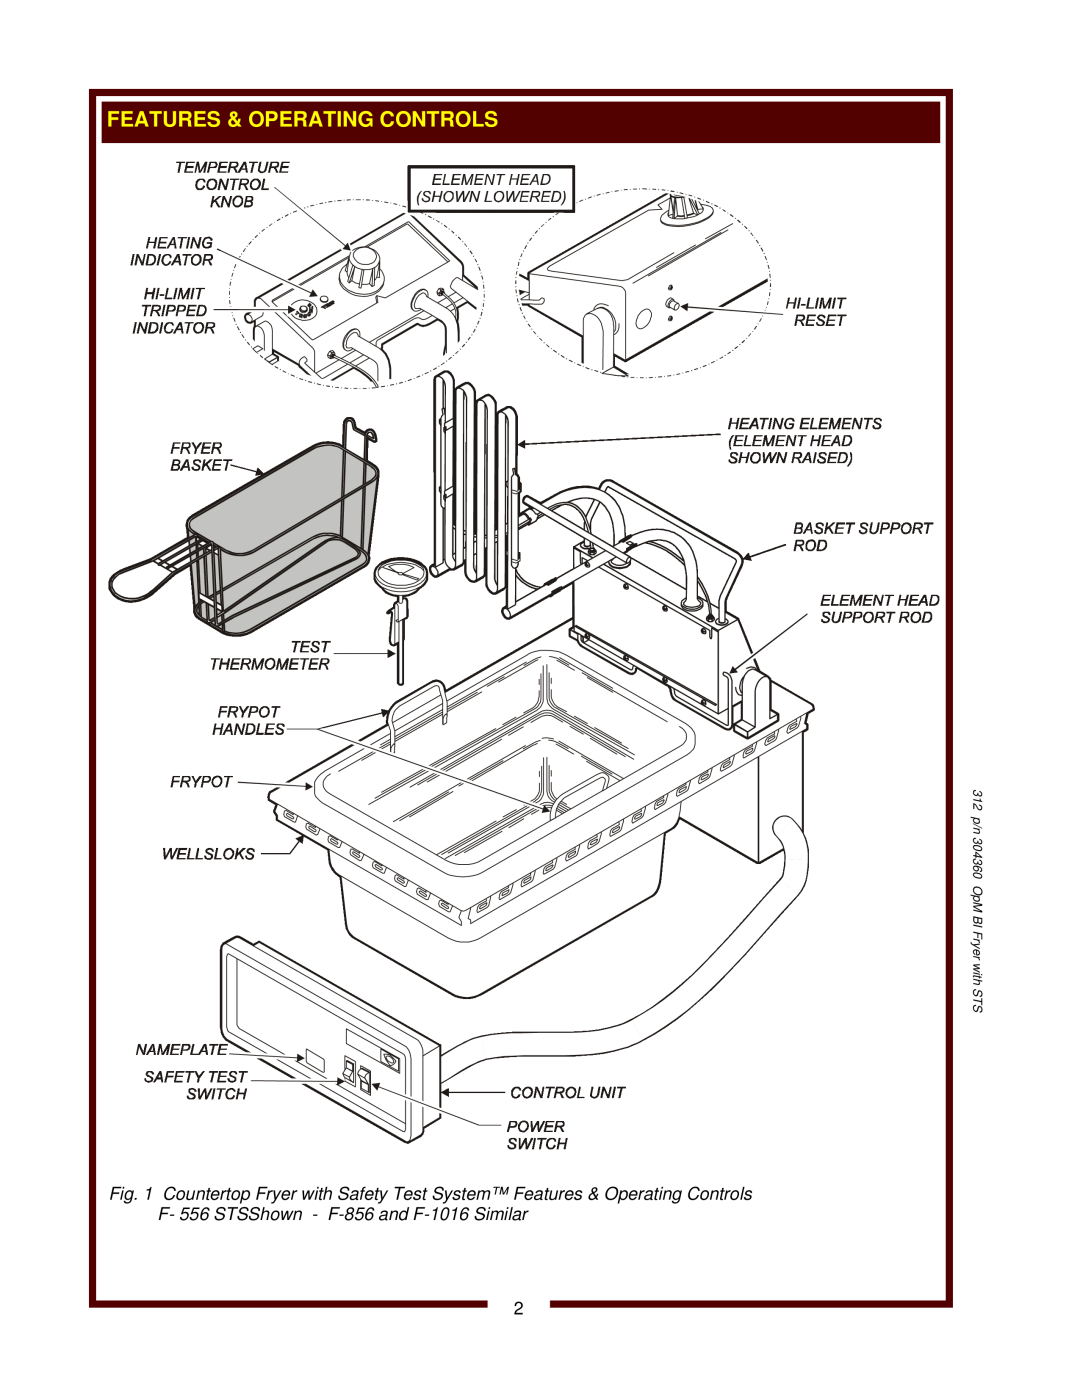 Wells F-556 STS operation manual F- 556 STSShown - F-856and F-1016Similar, 312 p/n 304360 OpM BI Fryer with STS 